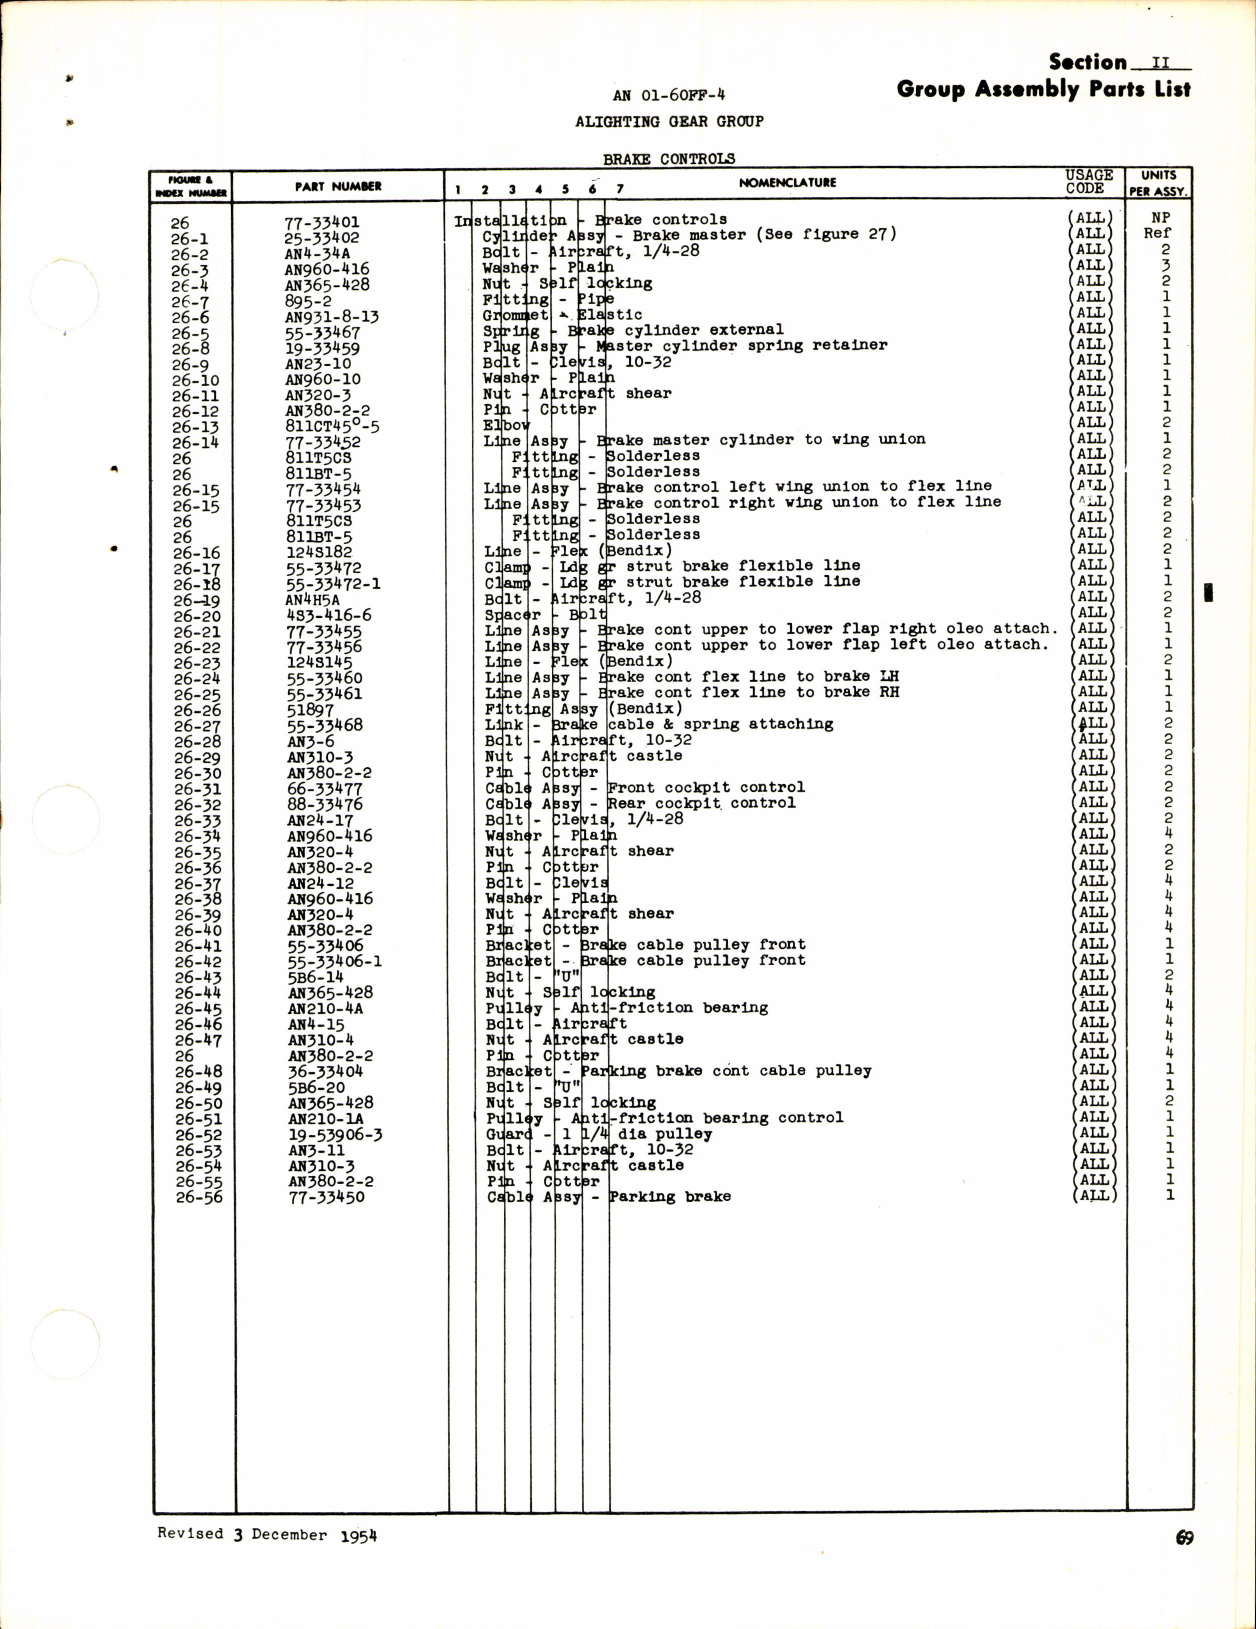 Sample page 3 from AirCorps Library document: Parts Catalog for T-6D, T-6F, SNJ-5, and SNJ-6